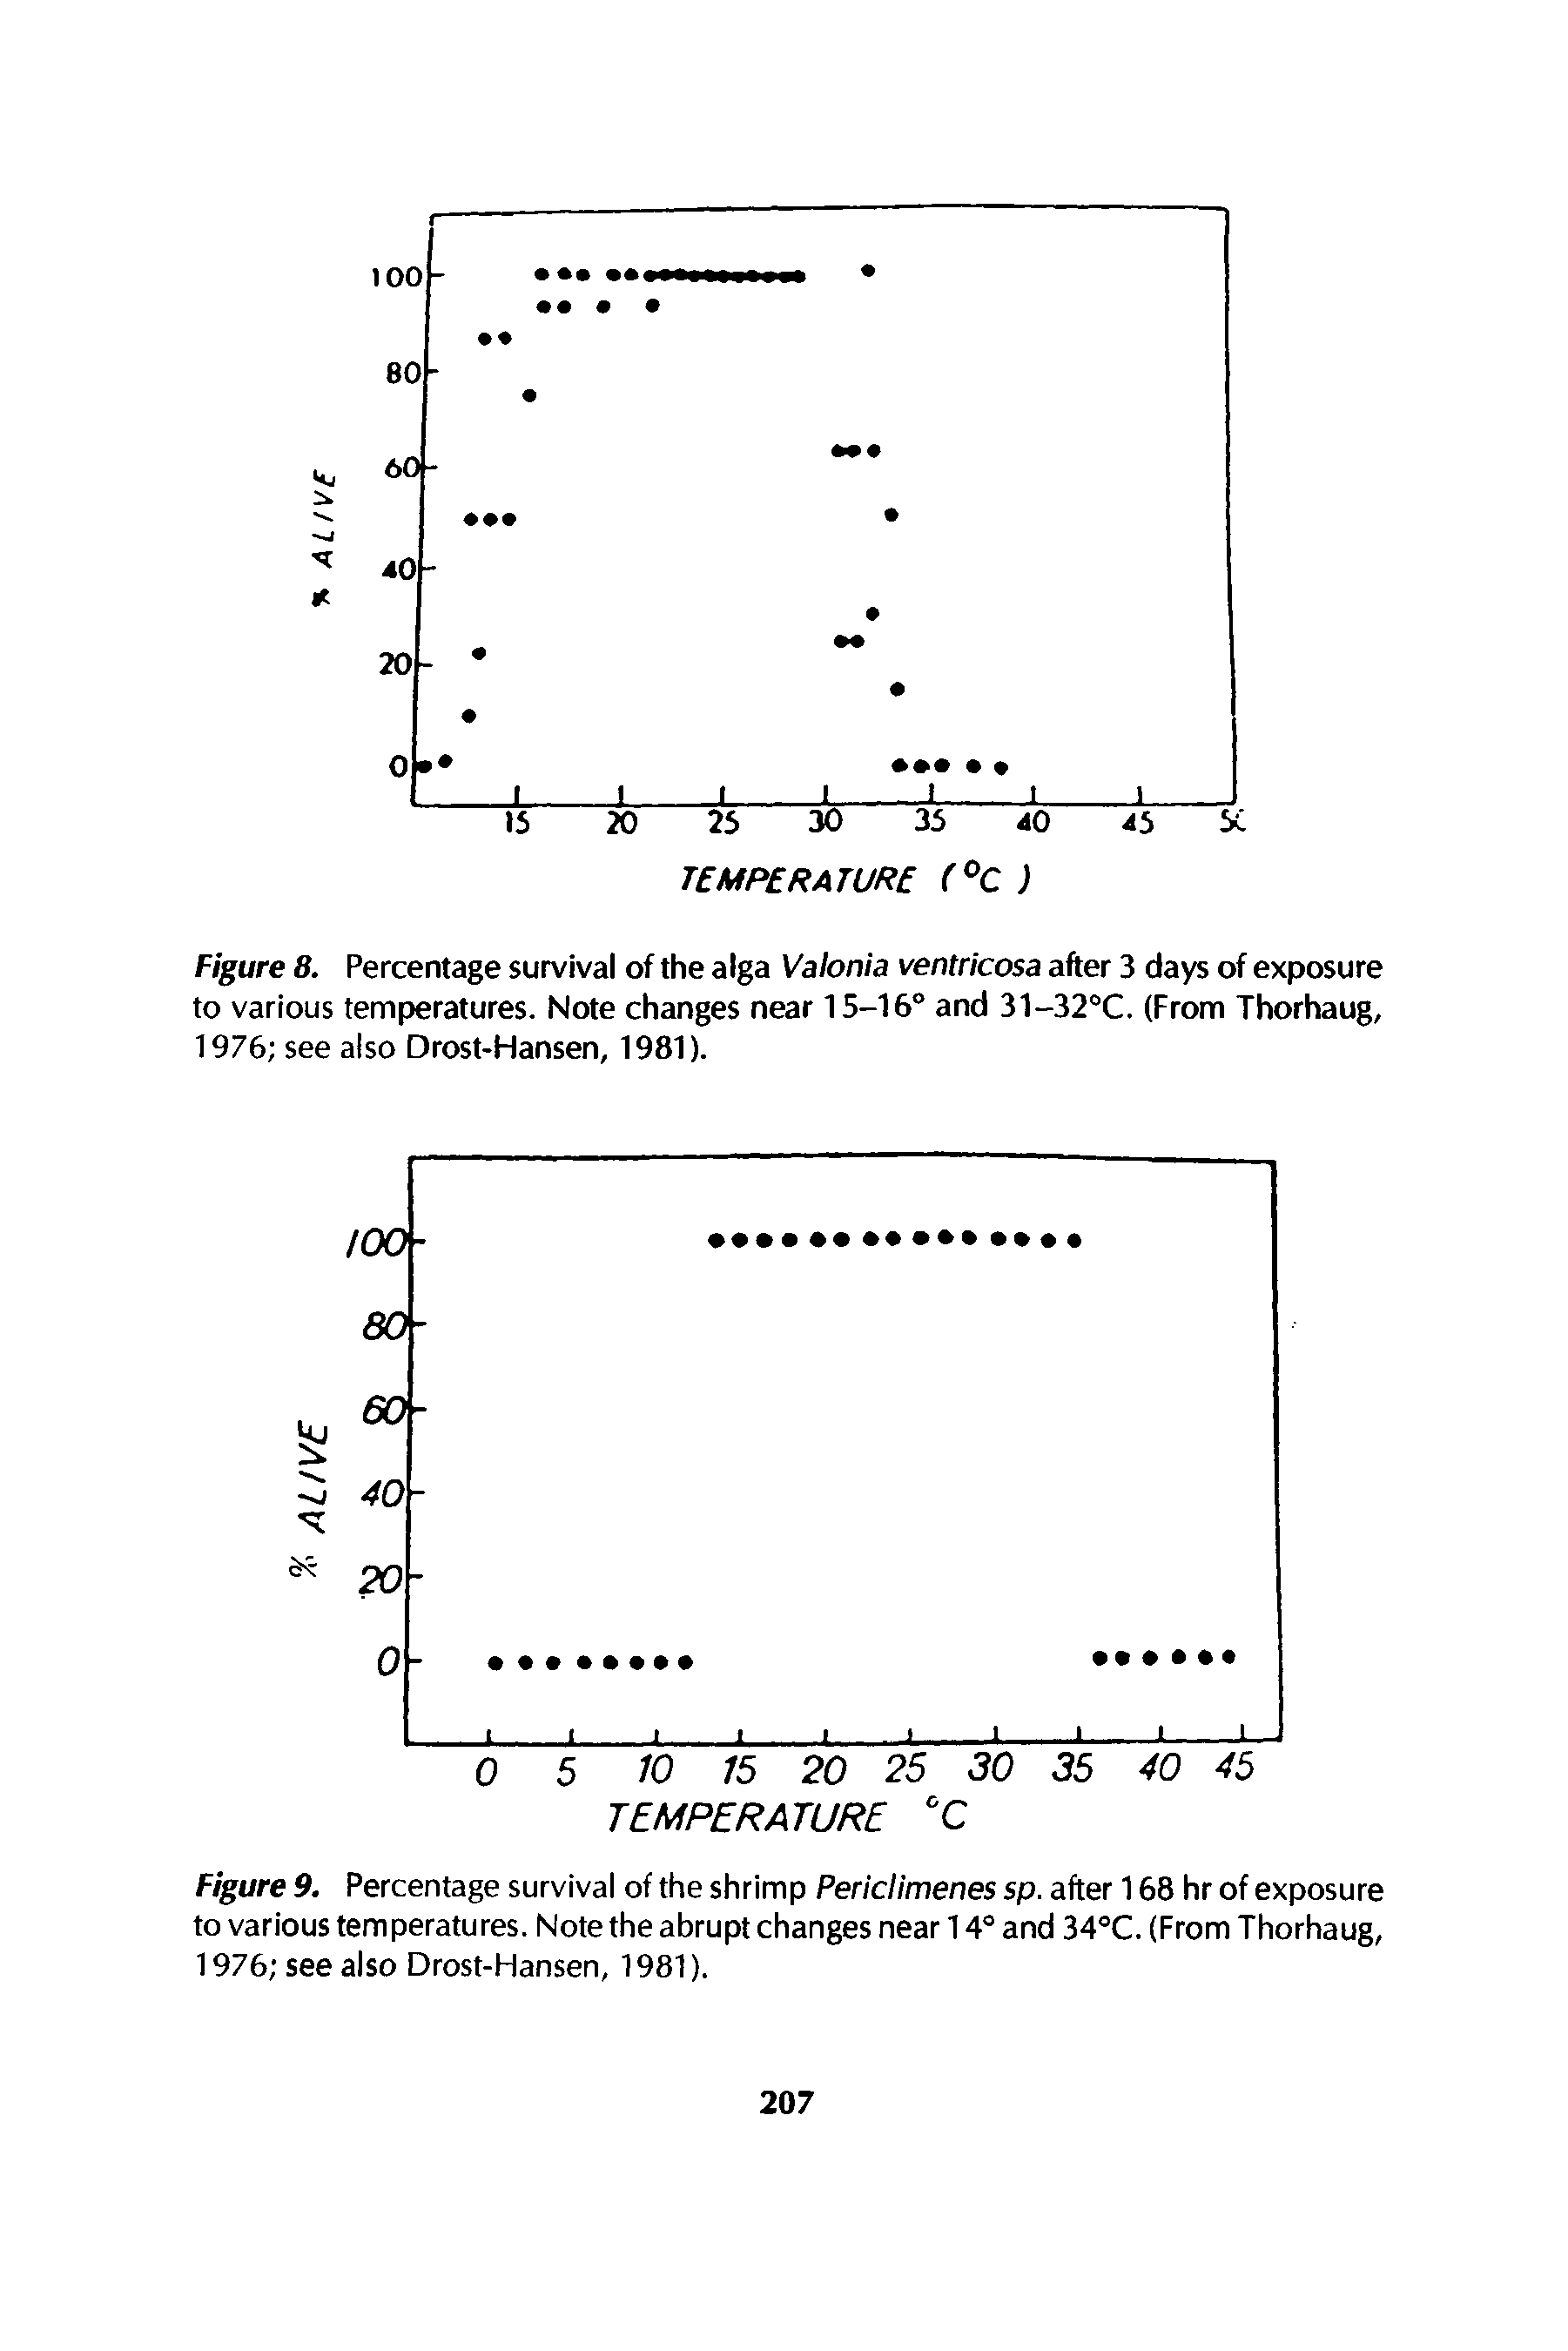 Figure 8. Percentage survival of the alga Valonia ventricosa after 3 days of exposure to various temperatures. Note changes near 15-16 and 31-32 C. (From Thorhaug, 1976 see also Drost-Hansen, 1981).